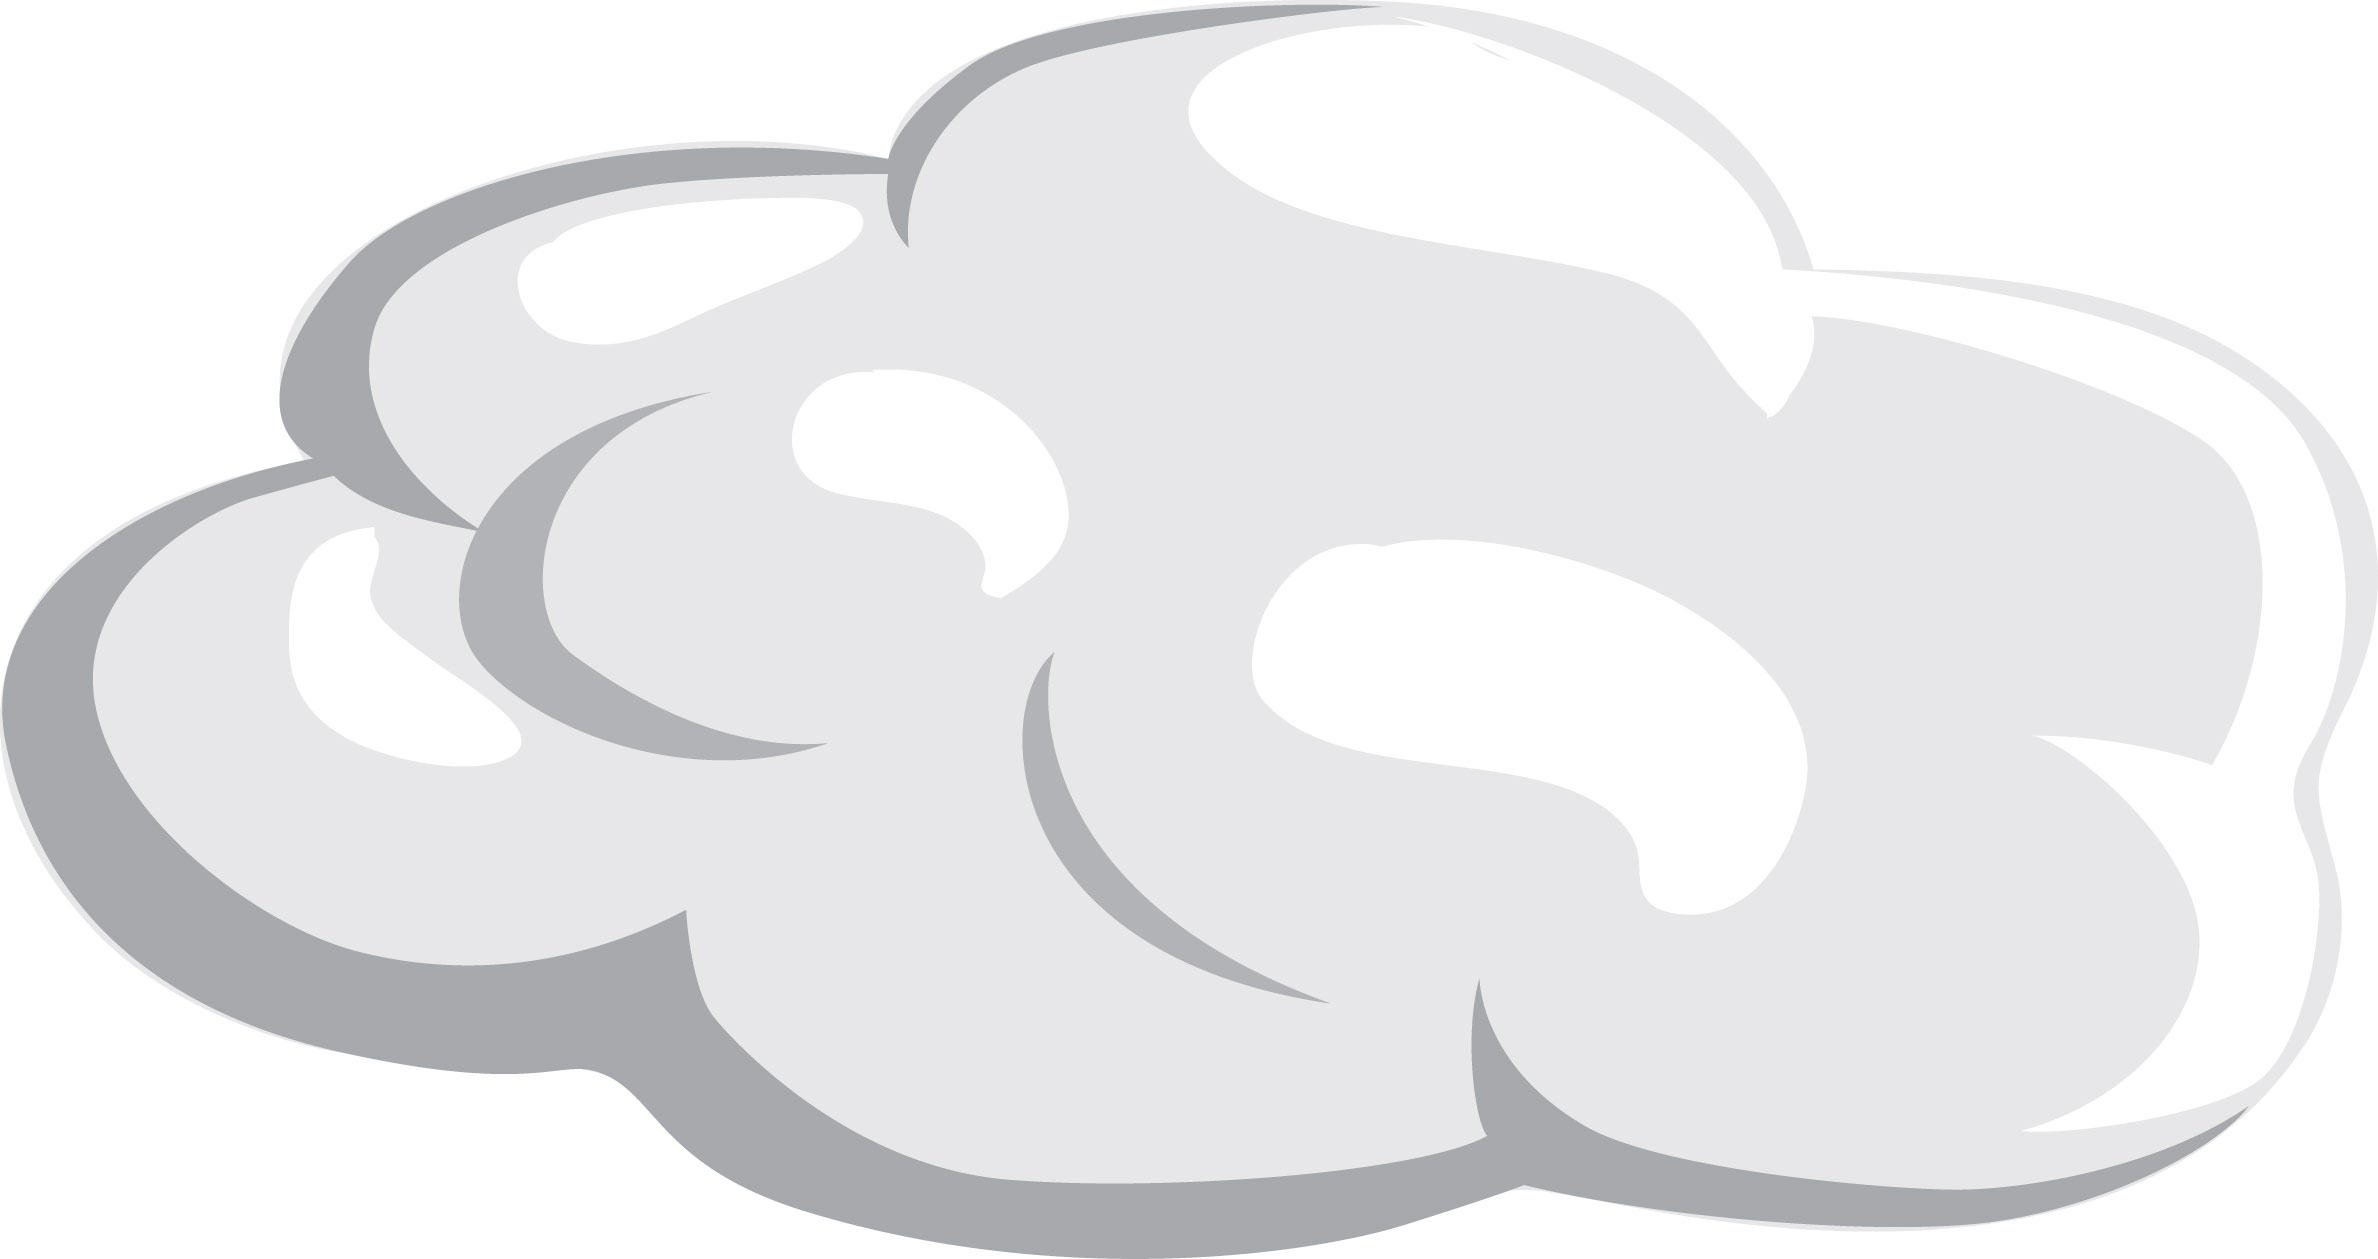 Cloud Of Clouds Clipart Clipart